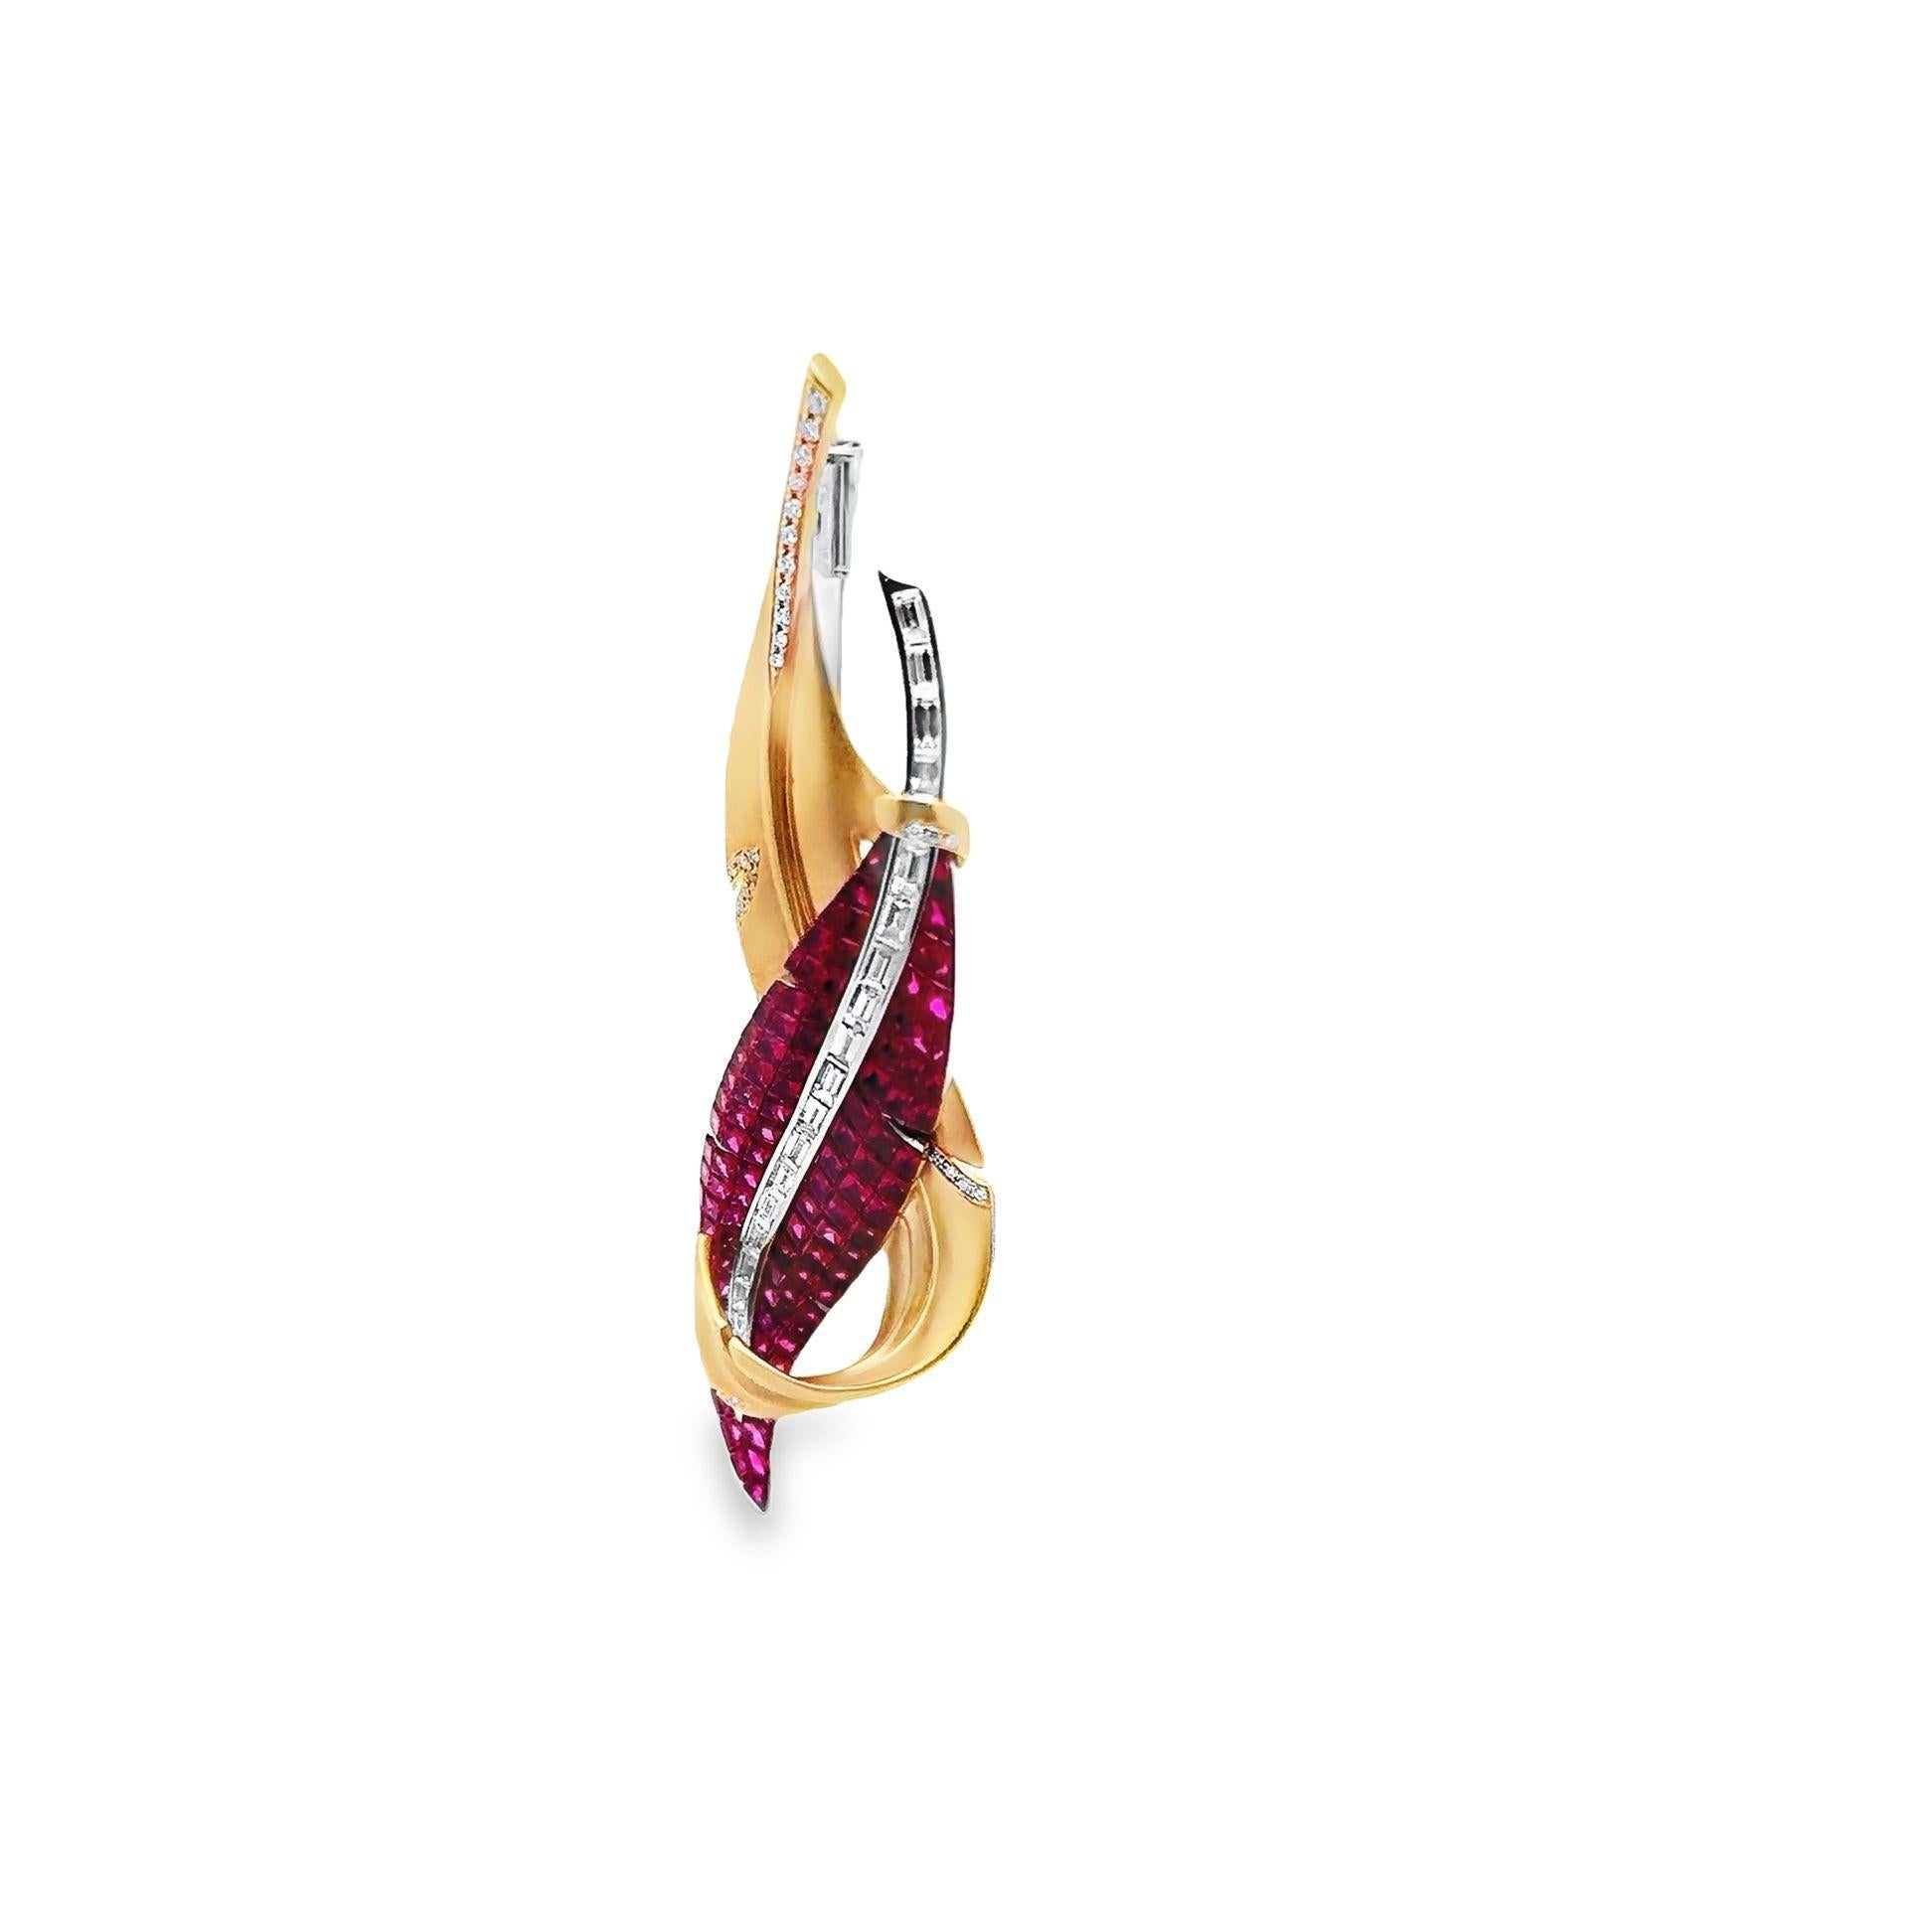 Brilliant Cut Invisible-Set Ruby Diamond 18K White & Yellow Gold Feather Pin Brooch, Unisex For Sale